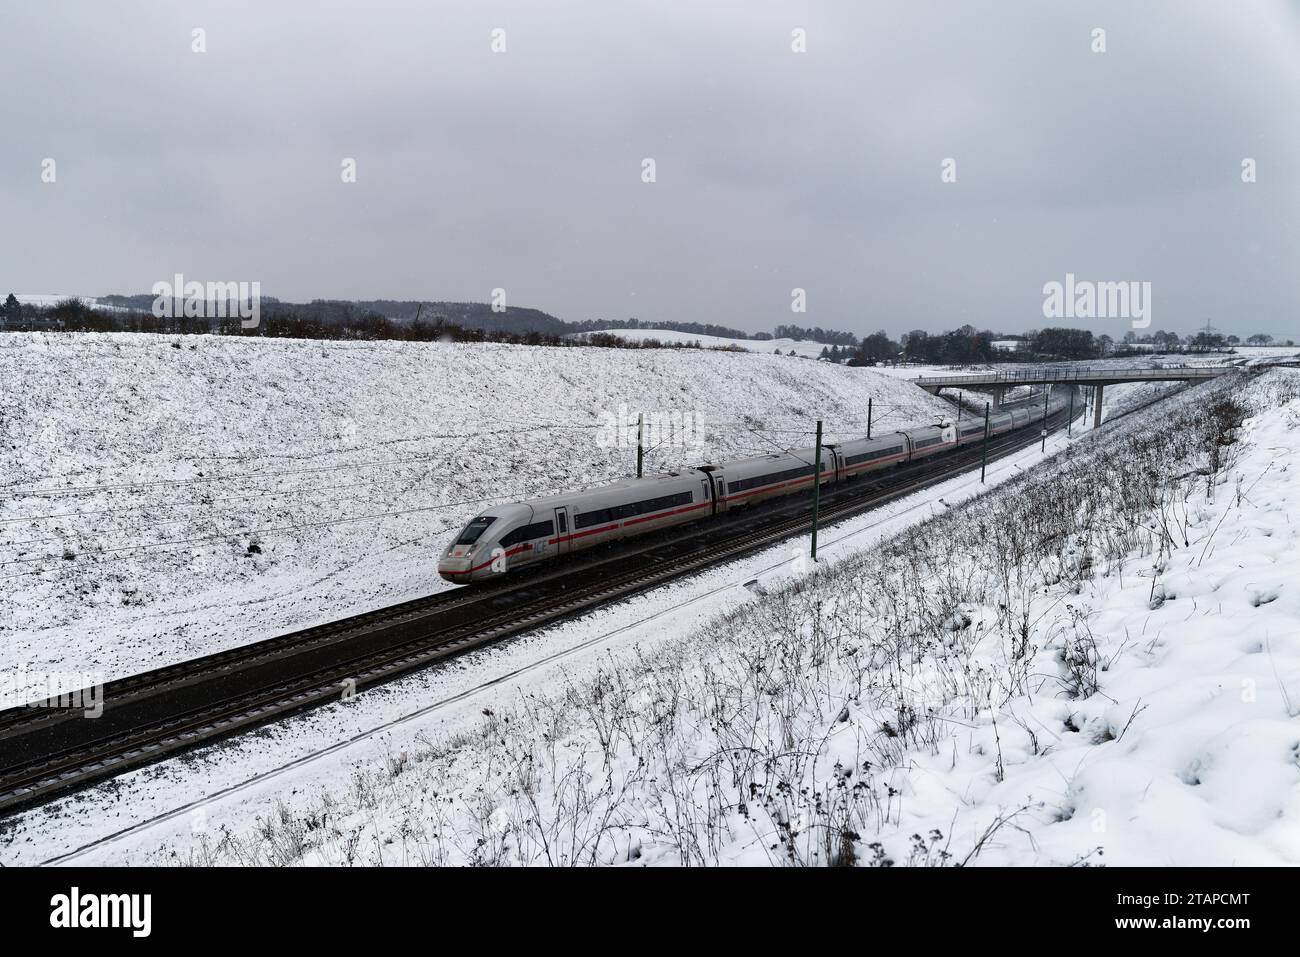 Coburg, Germany. Dec 2 2023. Cold weather in northern Bavaria after heavy snowfalls as a train passes under a footbridge. Credit: Clearpiximages/Alamy Live News Stock Photo